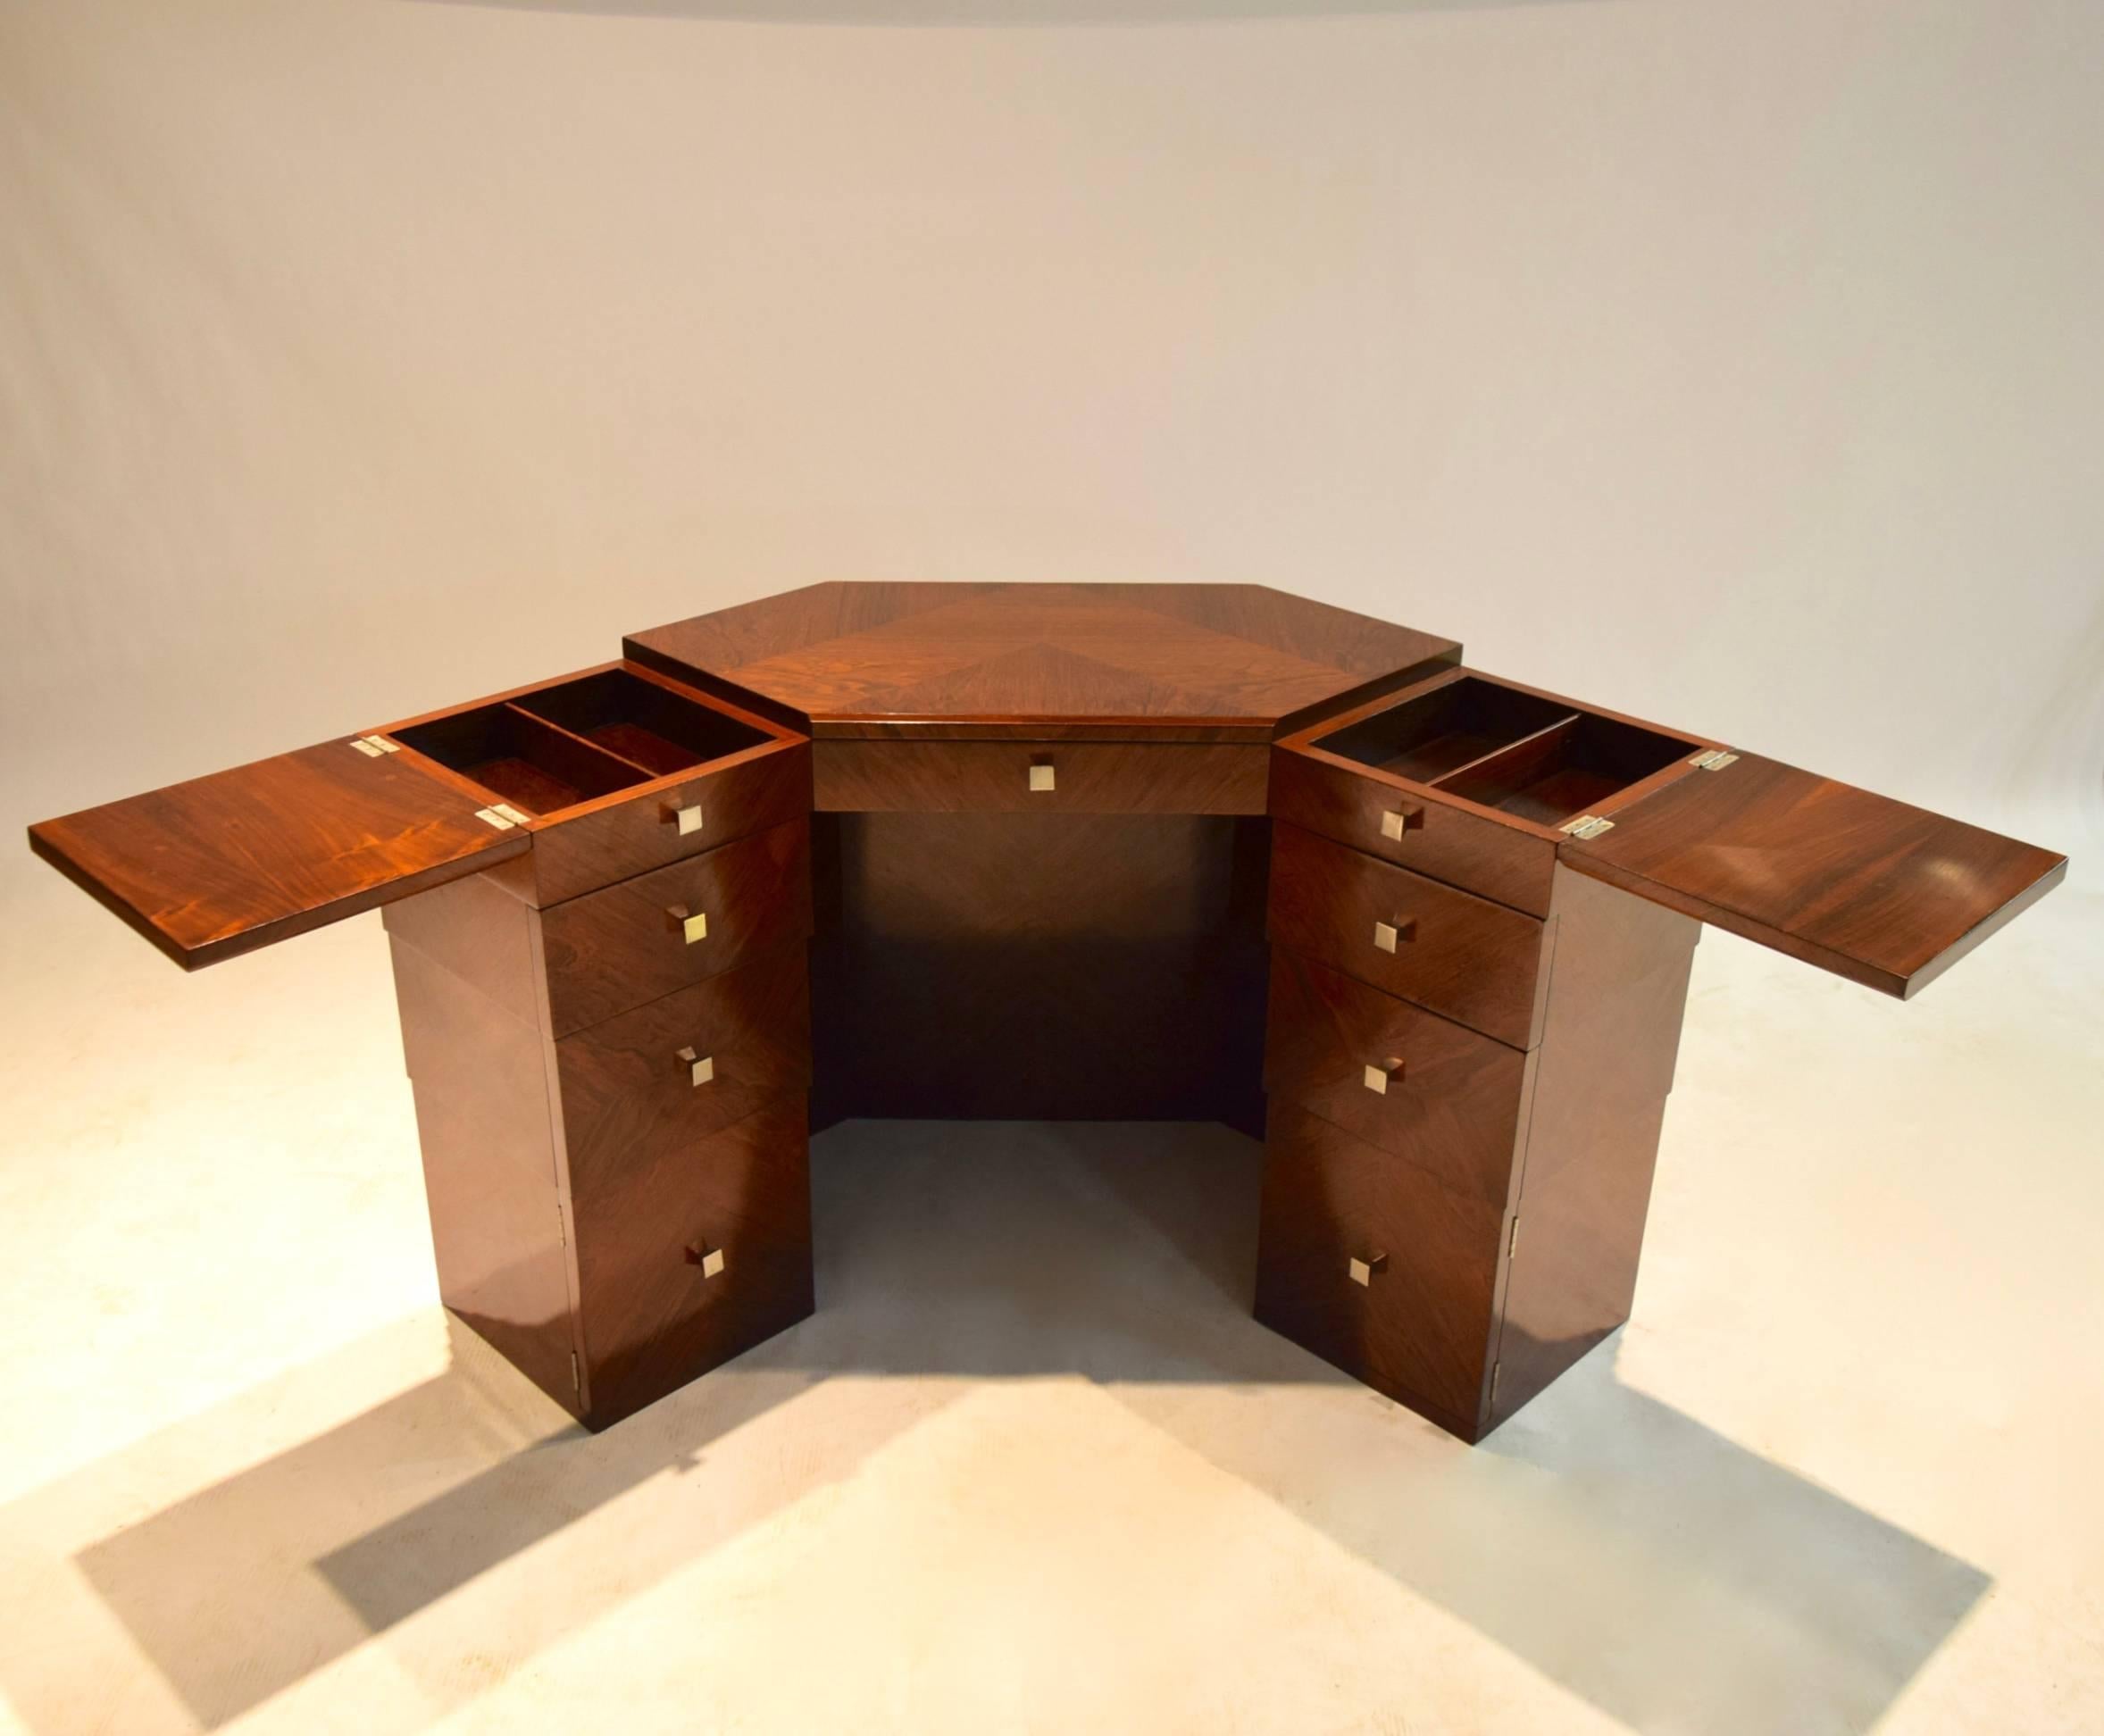 Rosewood dressing table for Maison Dominique, that can also serve as a writing table, has one center drawer and drawers symmetrically placed on the right and left sides: a hinged opening on the top adjacent to the hexagonal middle that each reveal a